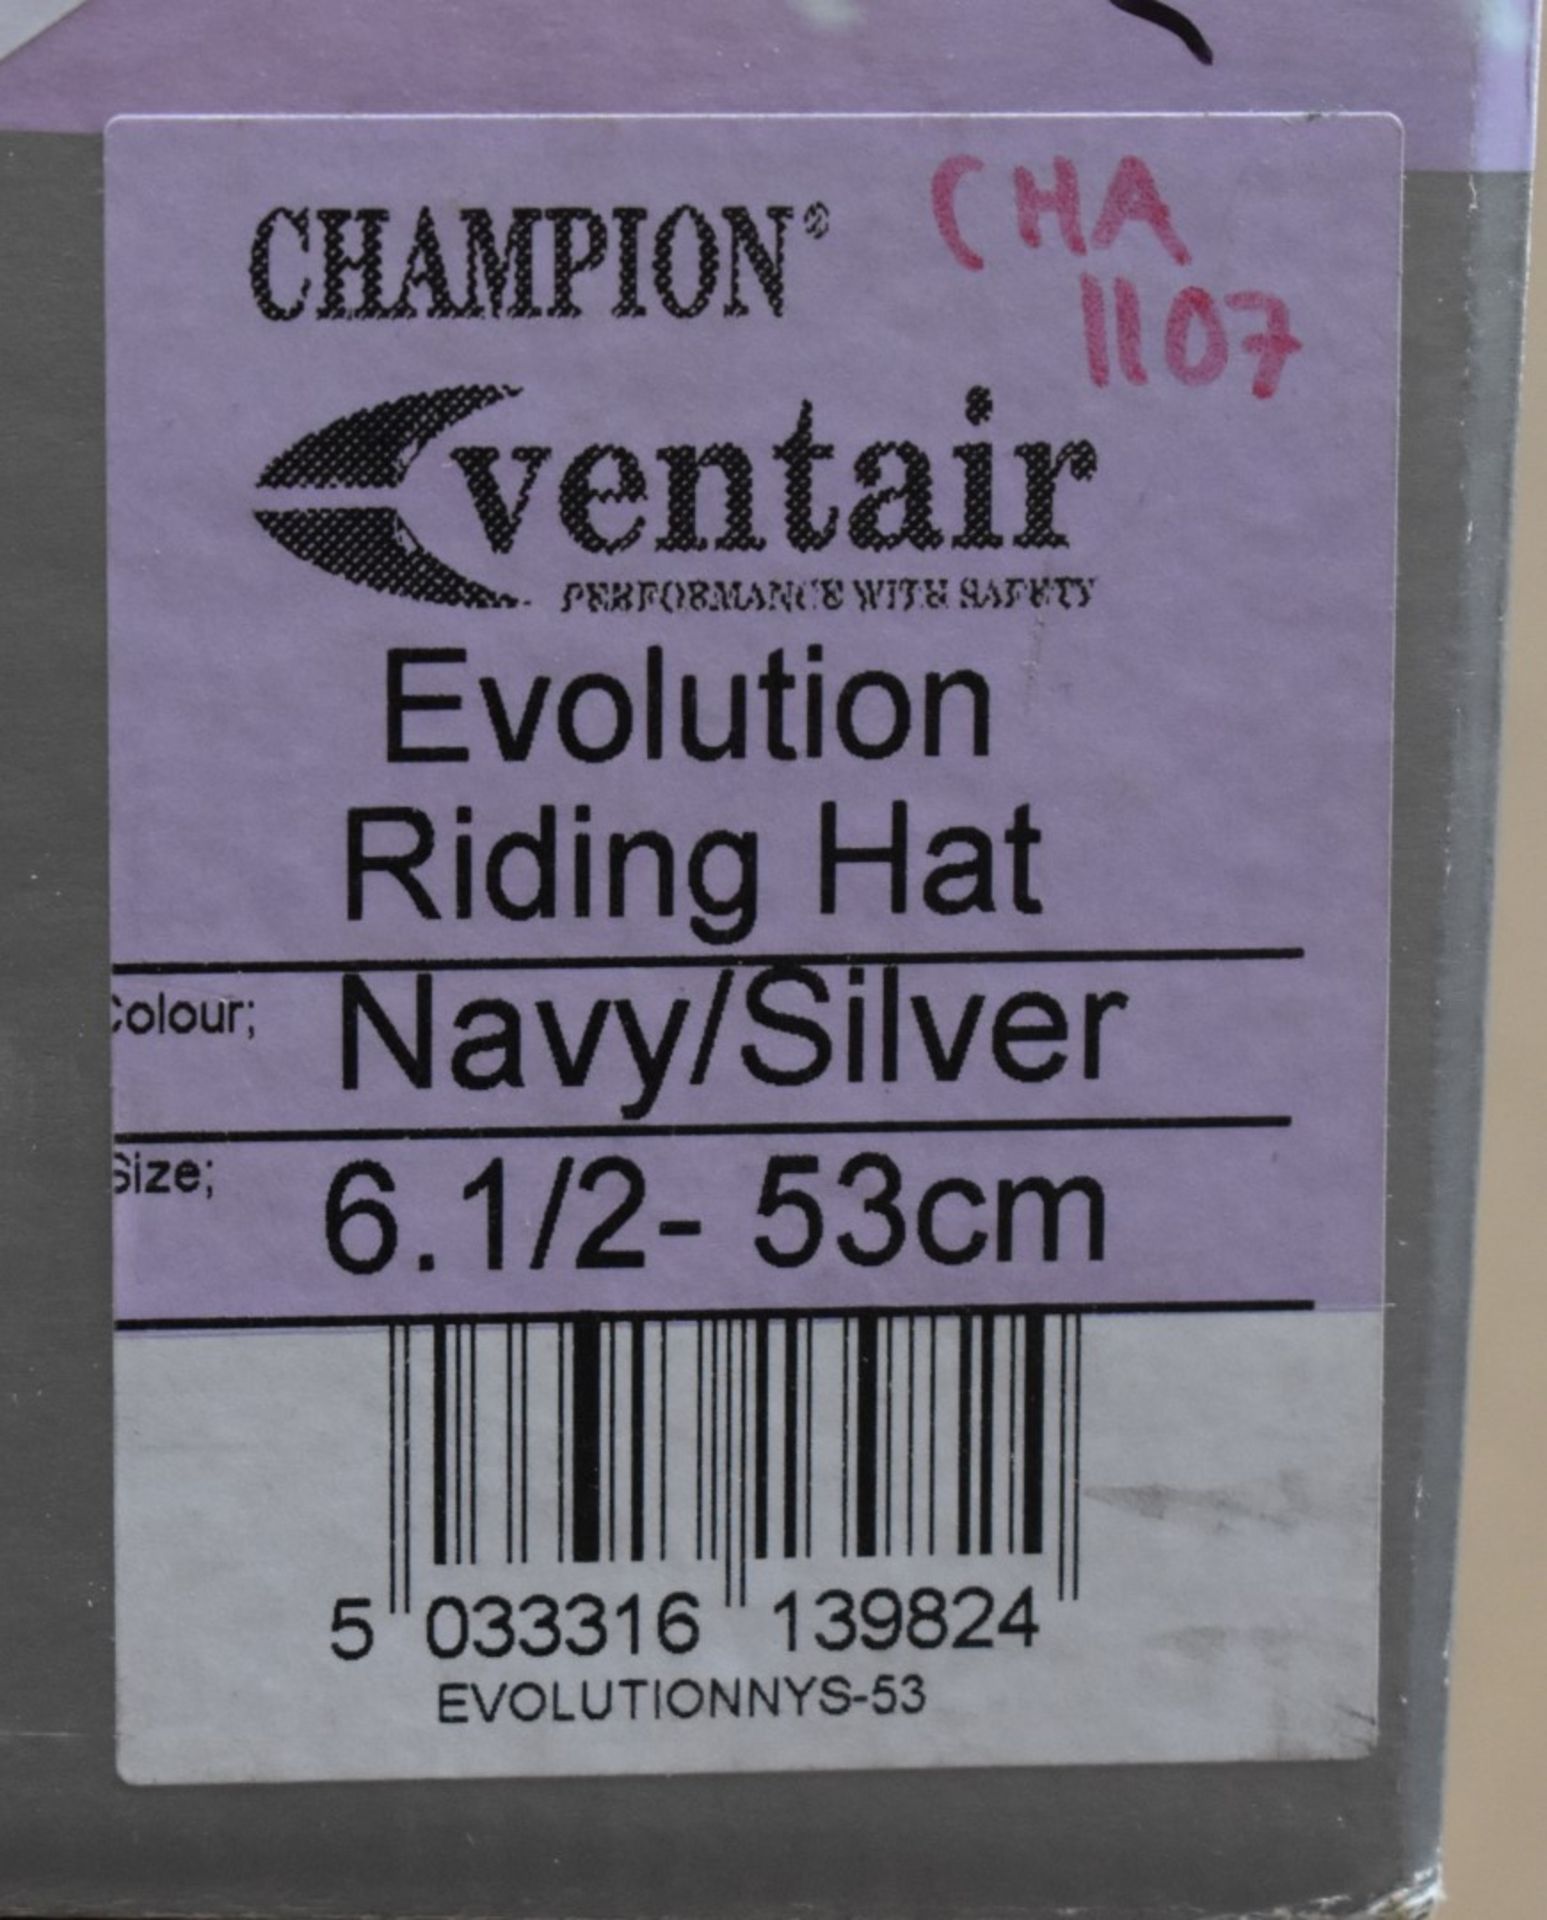 4 x Champion Ventair Evolution Horse Riding Hats - Various Sizes and Colours Included - Unused Boxed - Image 5 of 11